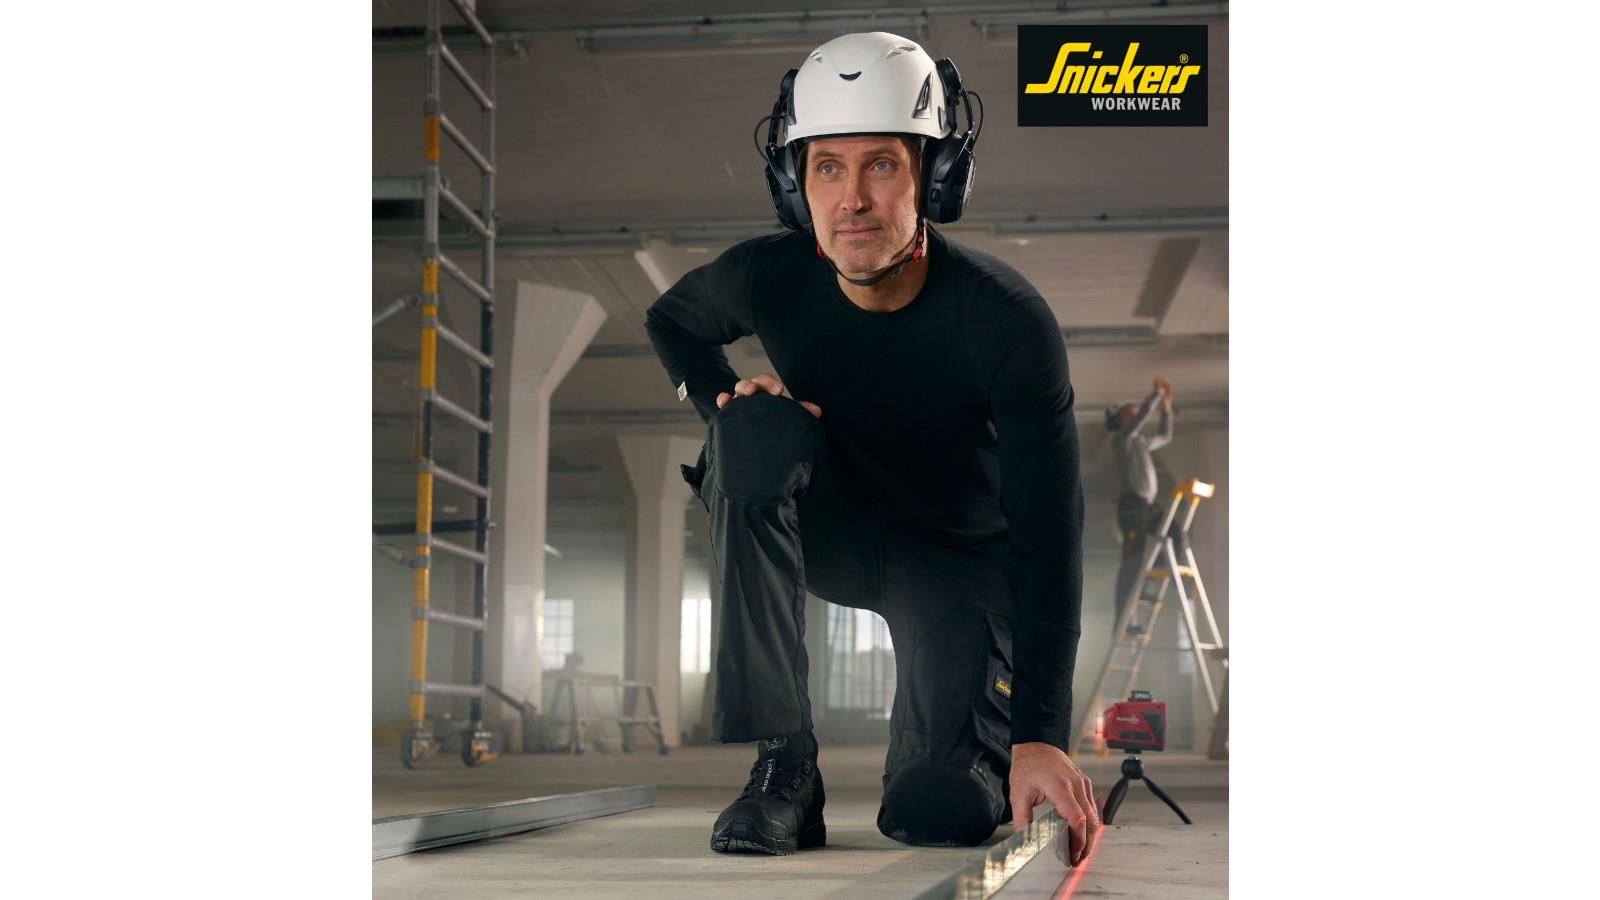 The World's First Work Trousers With Built-in, Certified Kneepads image